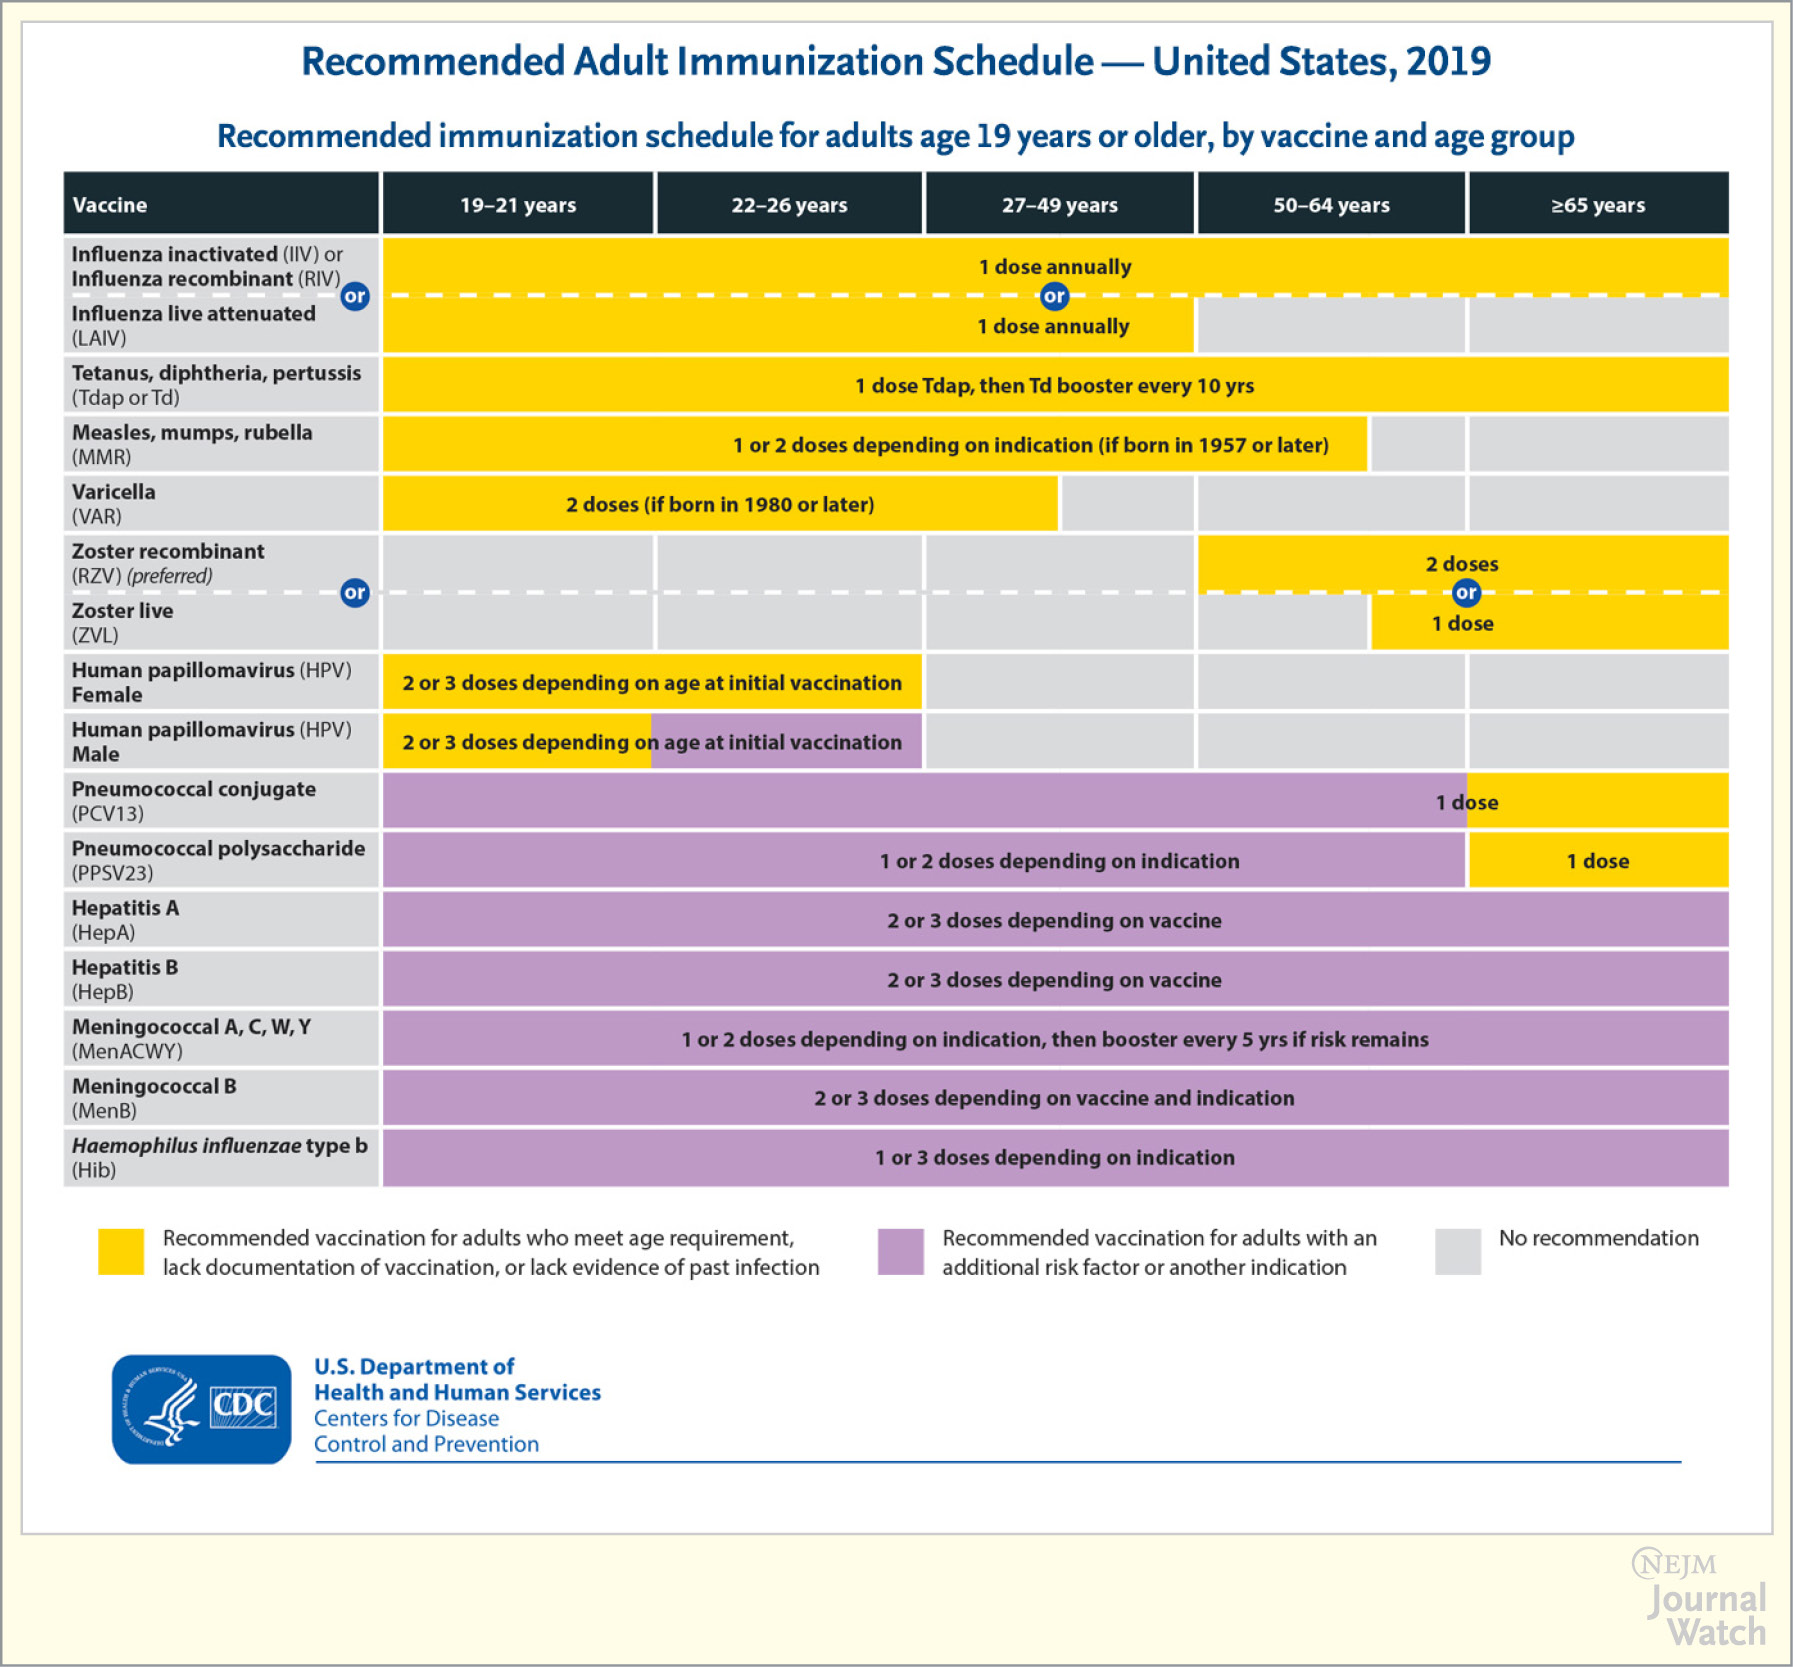 Recommended adult immunization schedule